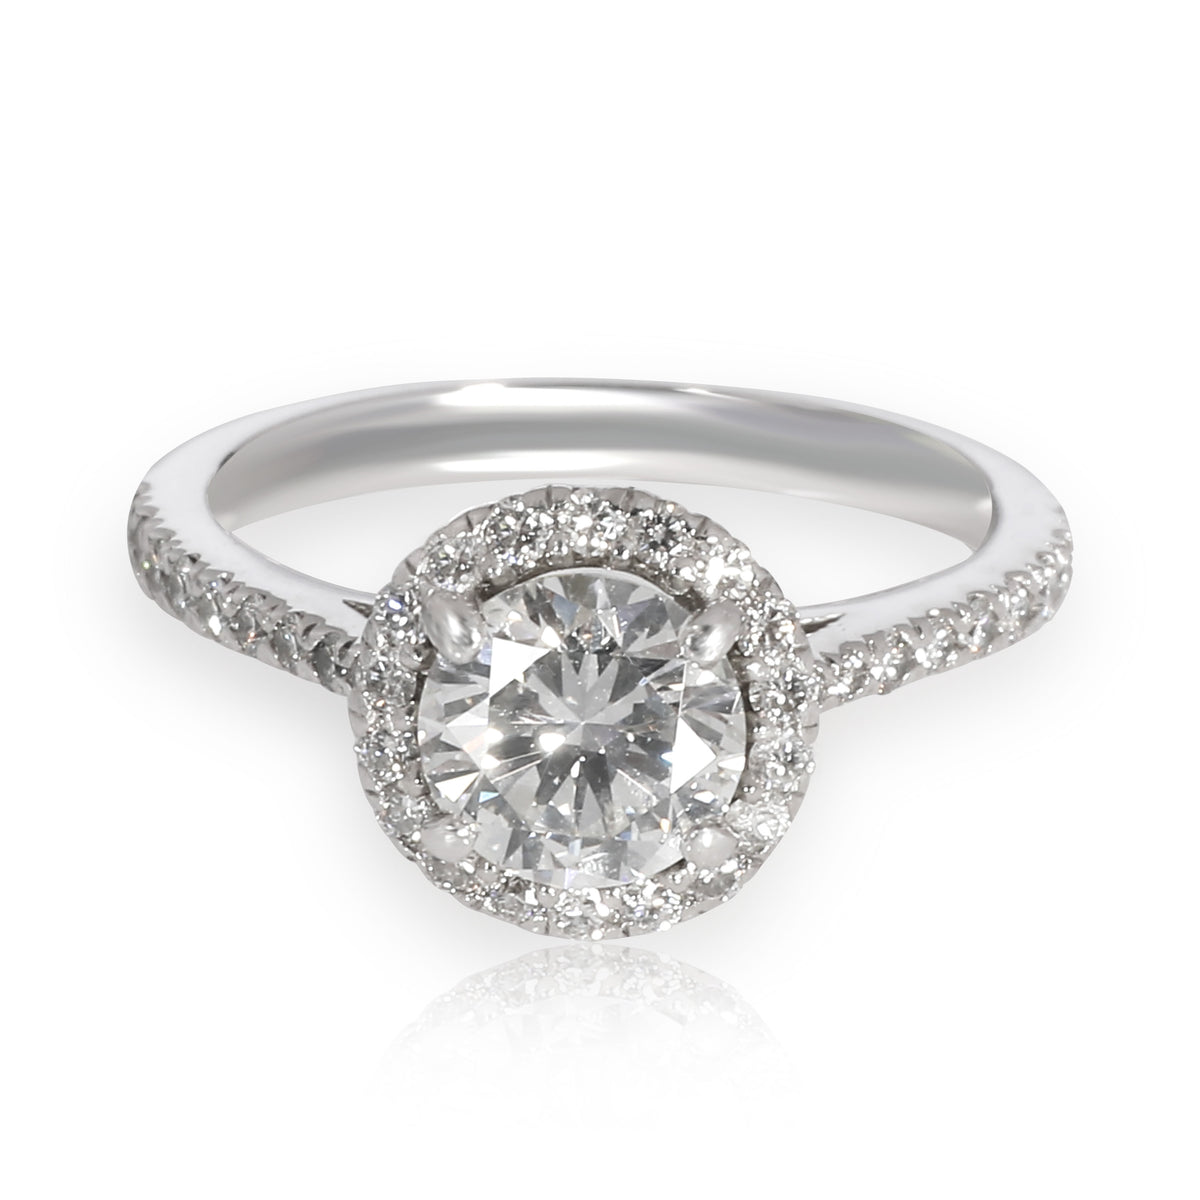 Halo Diamond Engagement Ring in Platinum EGL Certified F SI2 1.05 CTW